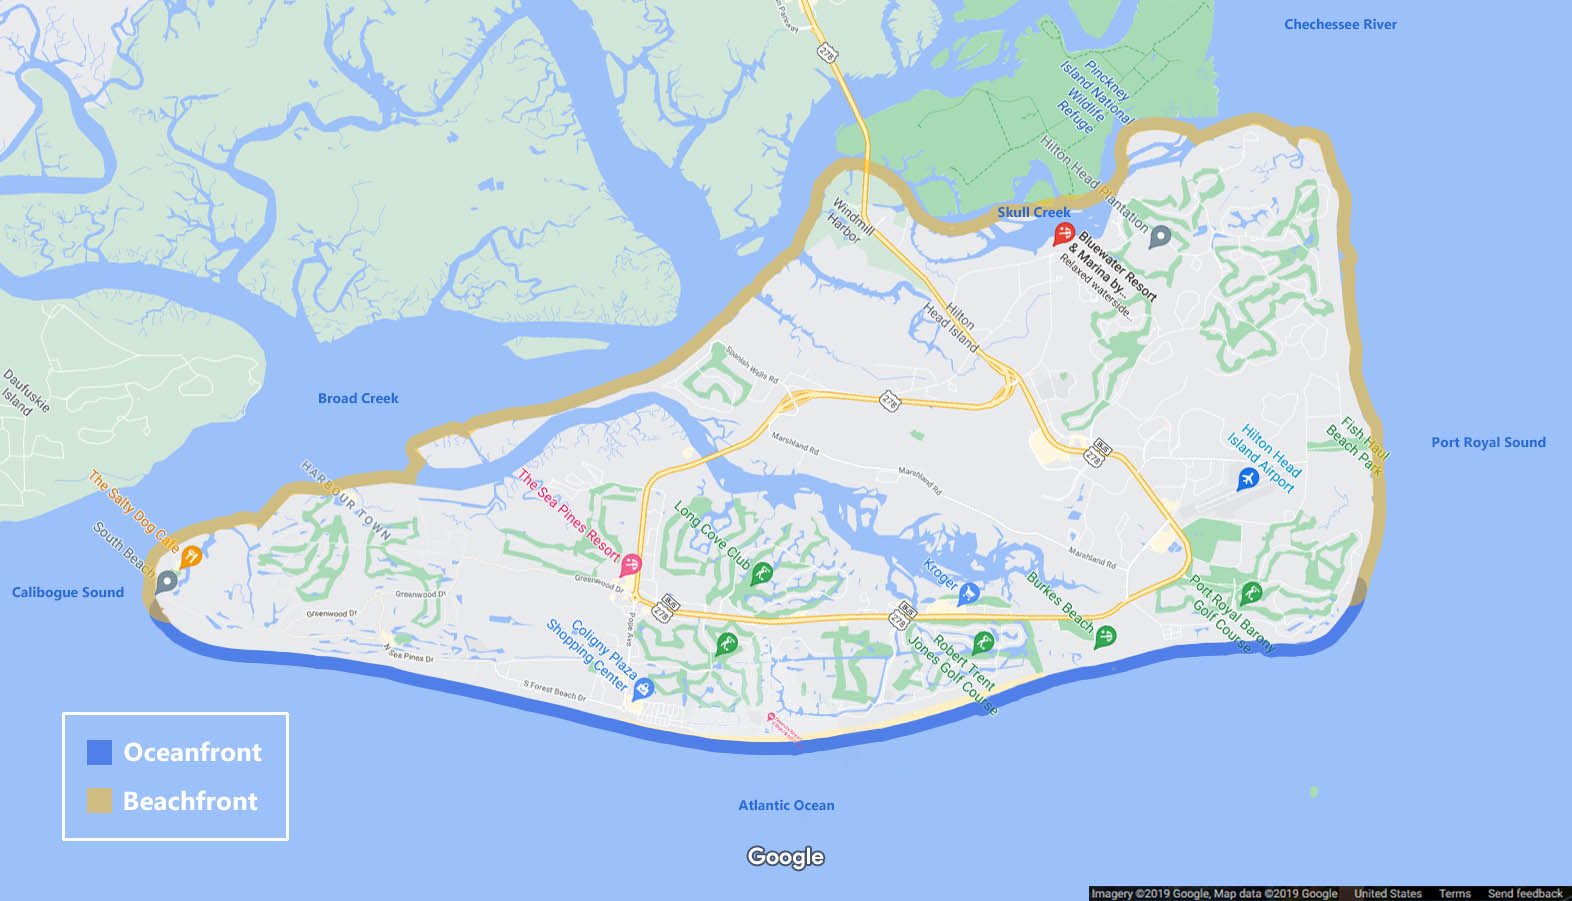 Hilton Head Island Google Map showing the different waterways around the island showing Oceanfront and Beachfront